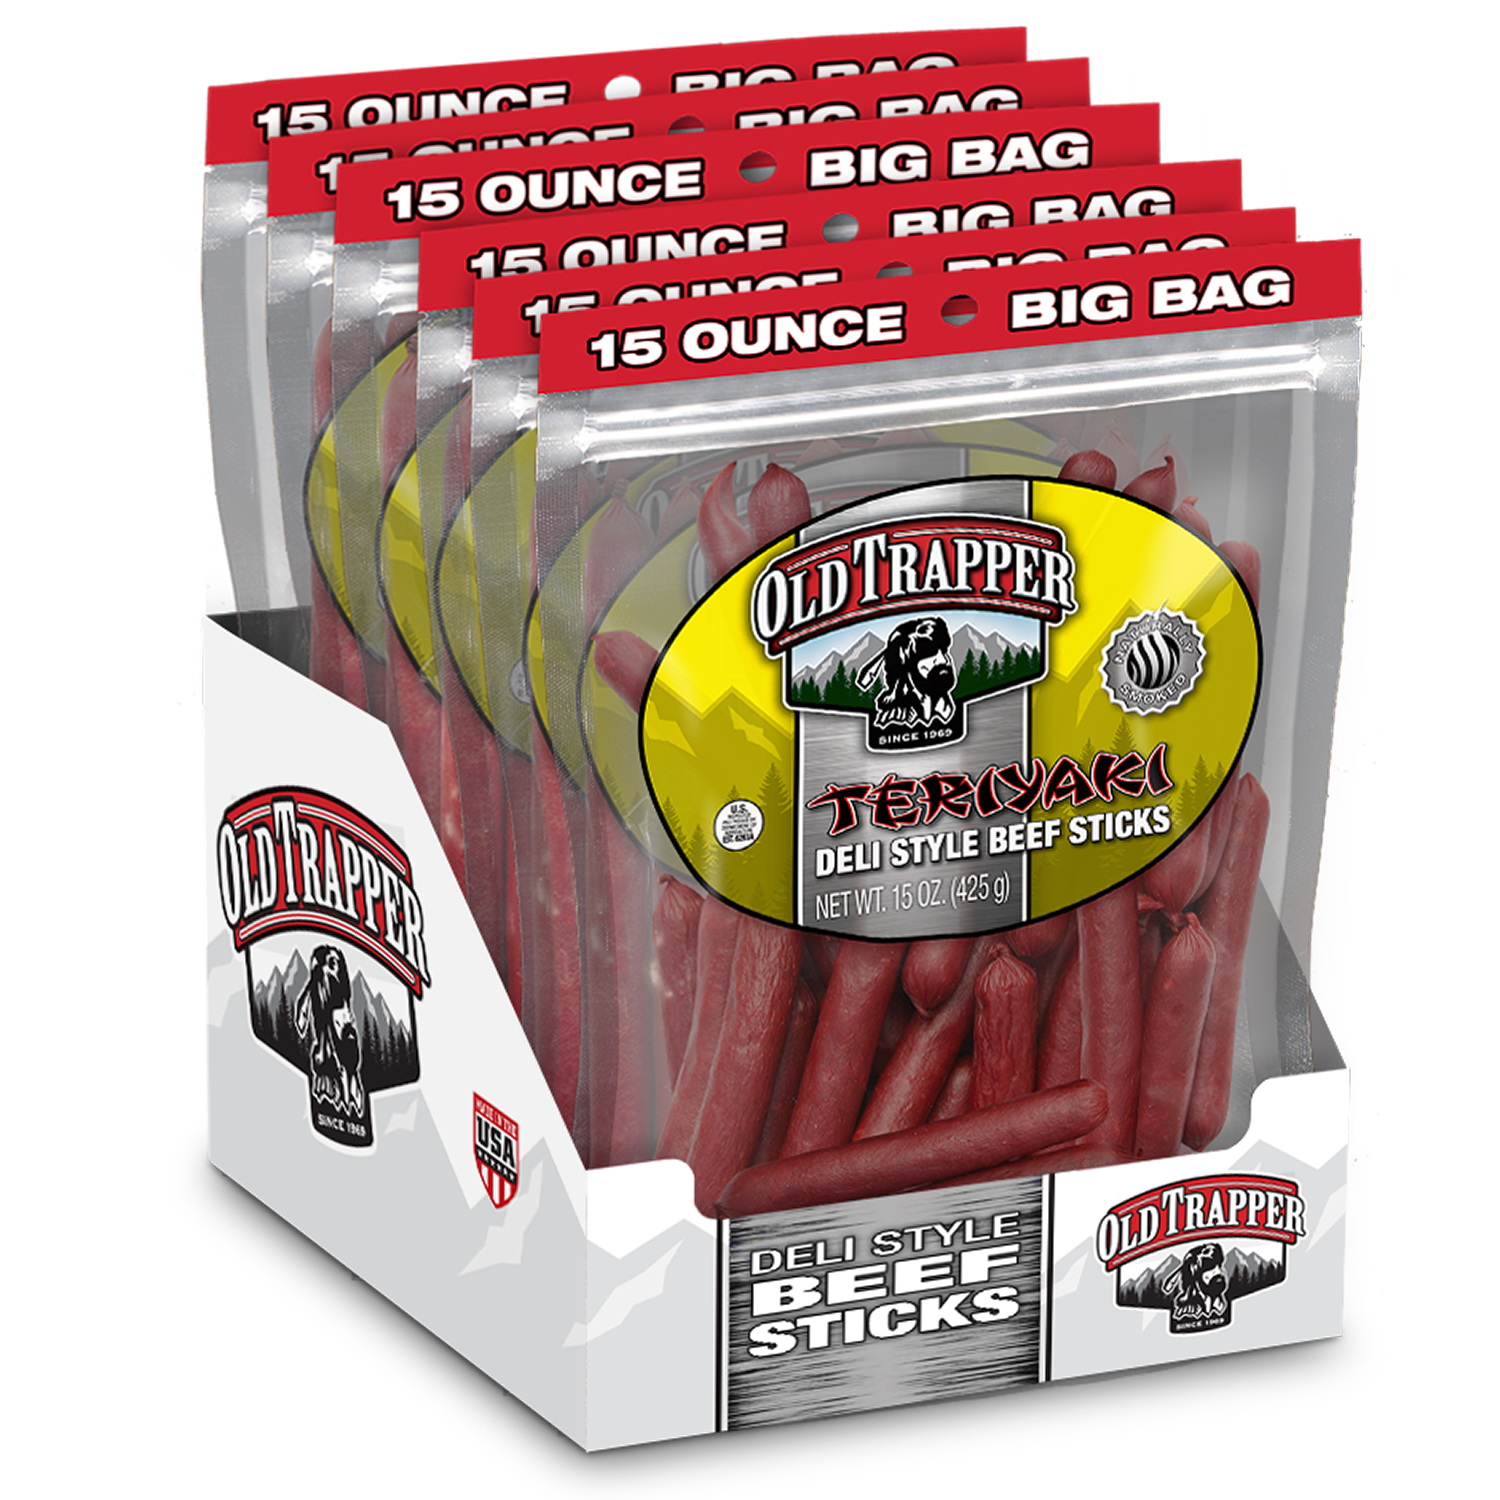 Case of 6 Packages -  Teriyaki Deli Style Beef Sticks